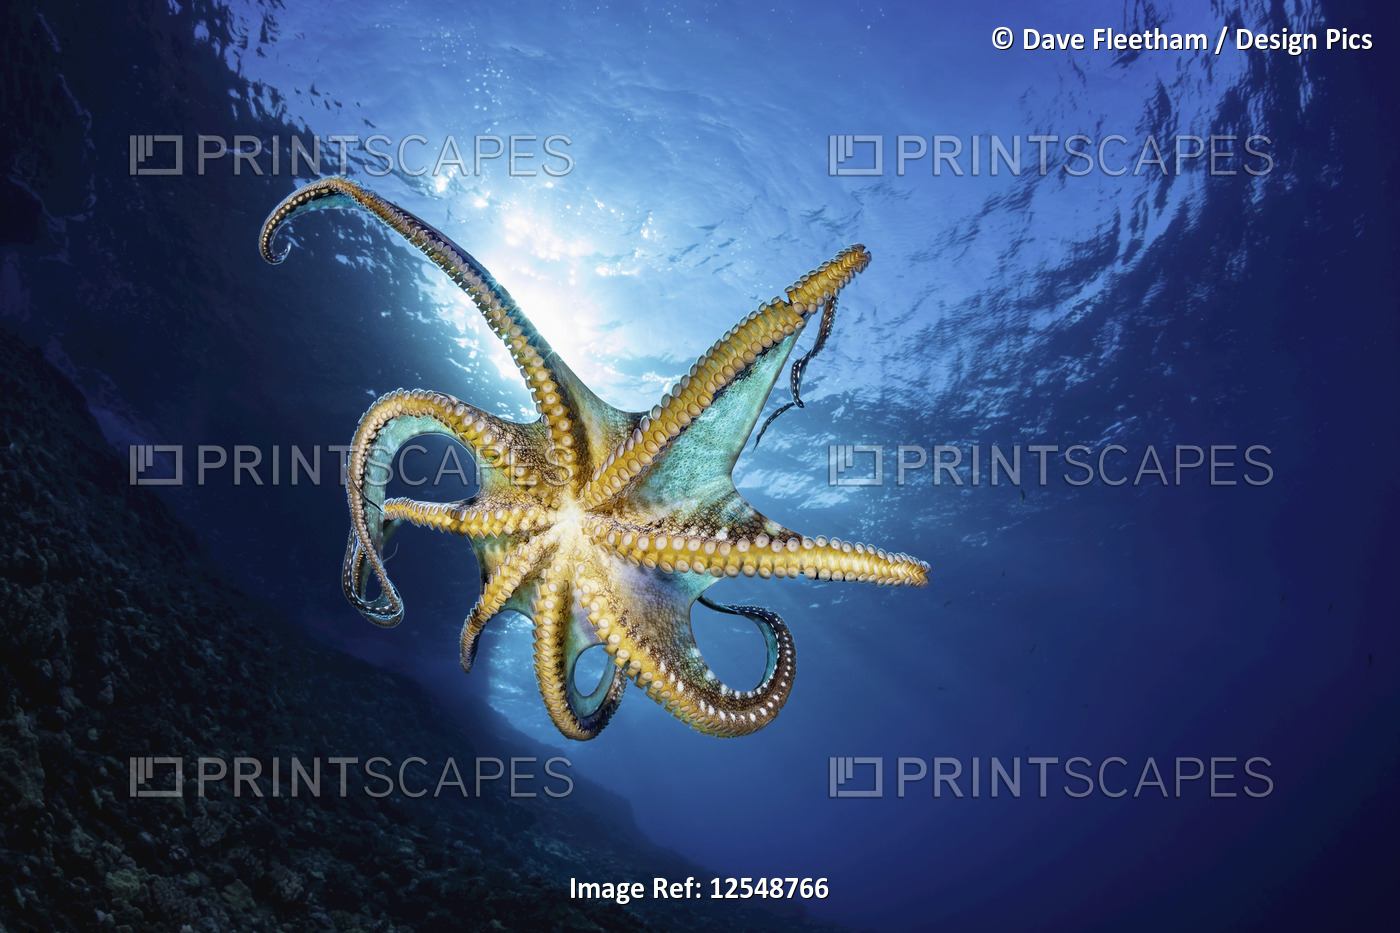 Day octopus (Octopus cyanea) in mid-water; Hawaii, United States of America